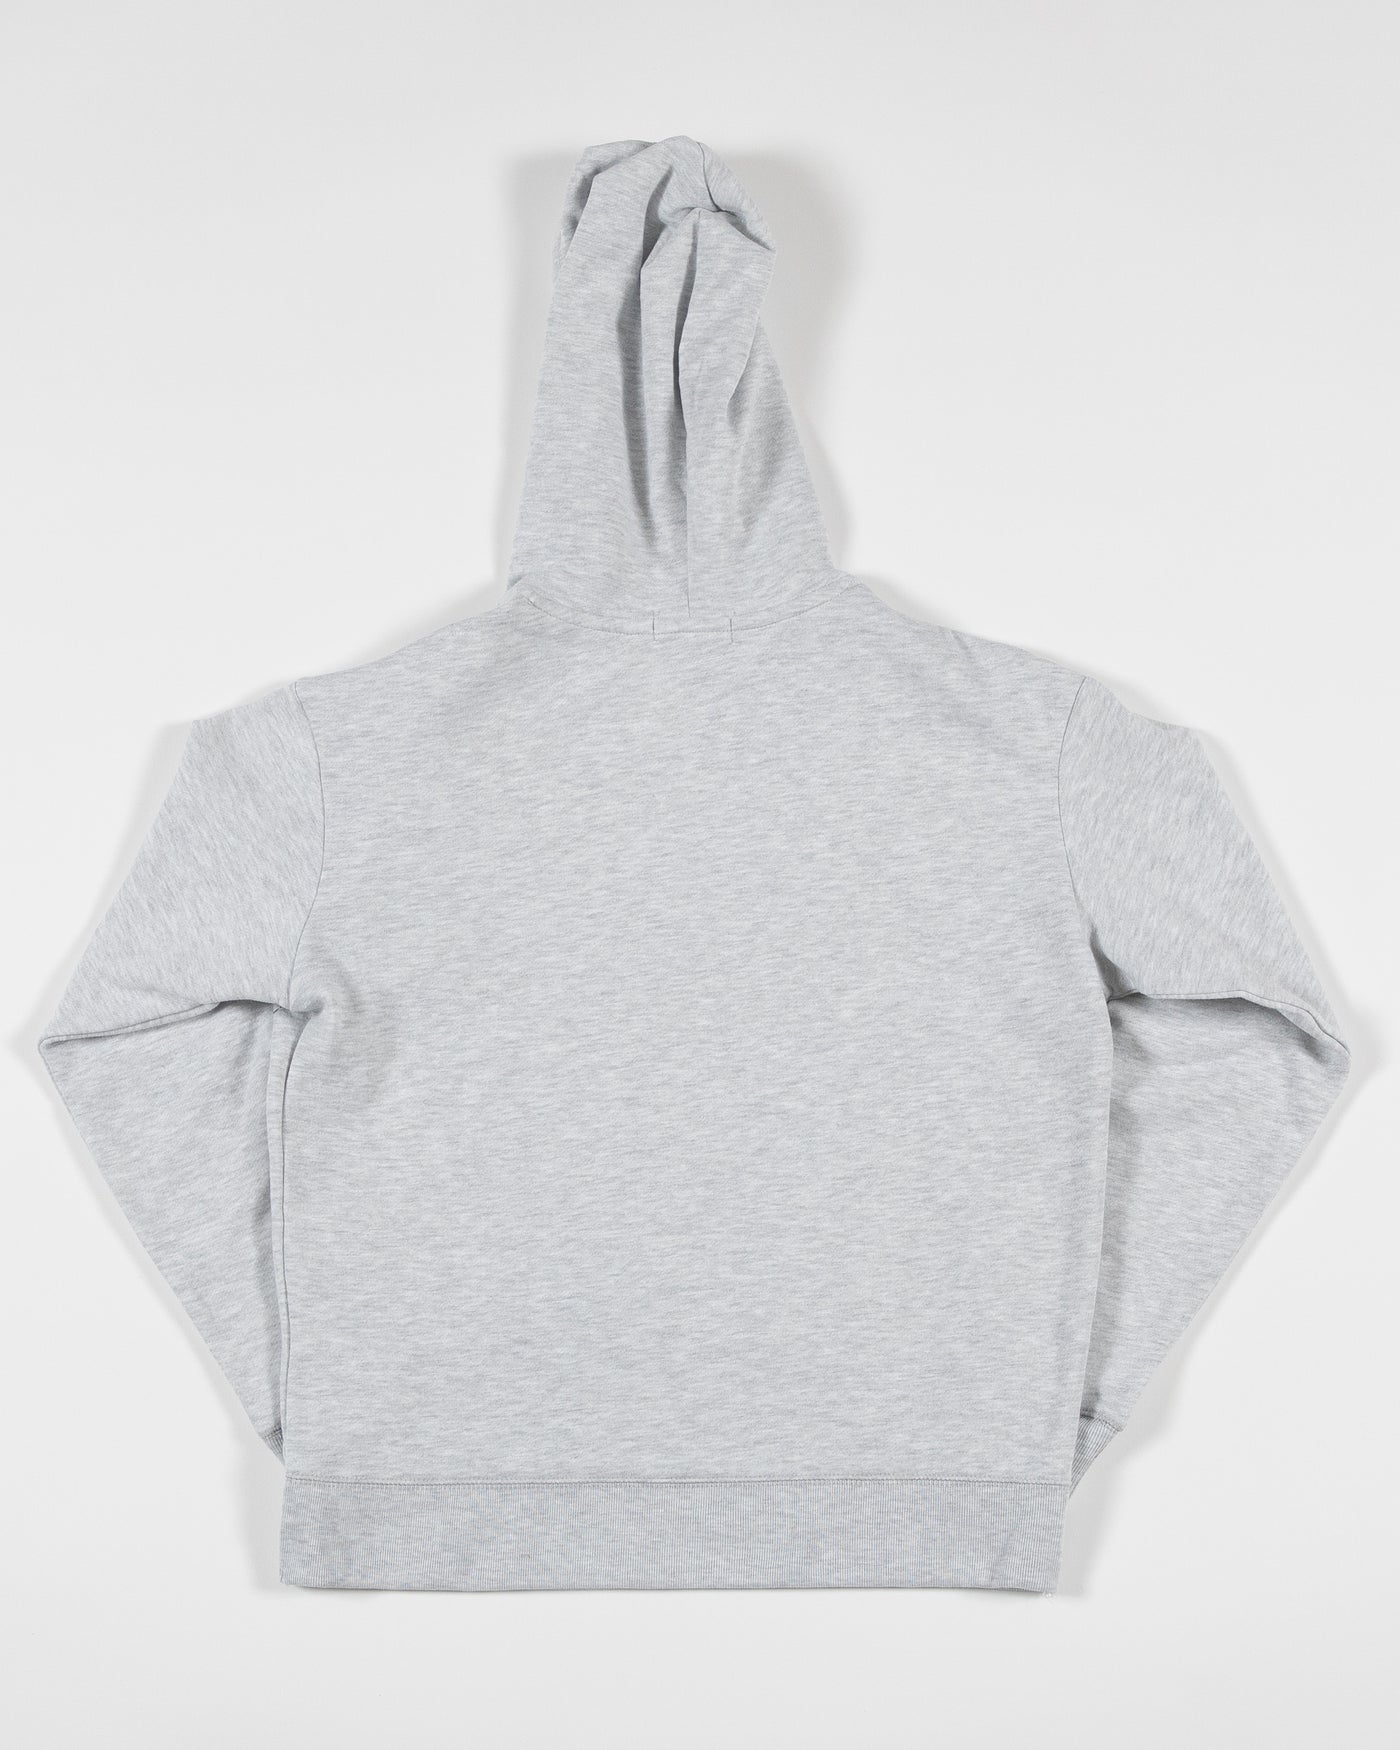 grey '47 brand hoodie with Chicago Blackhawks primary logo and wordmark across front chest - back lay flat